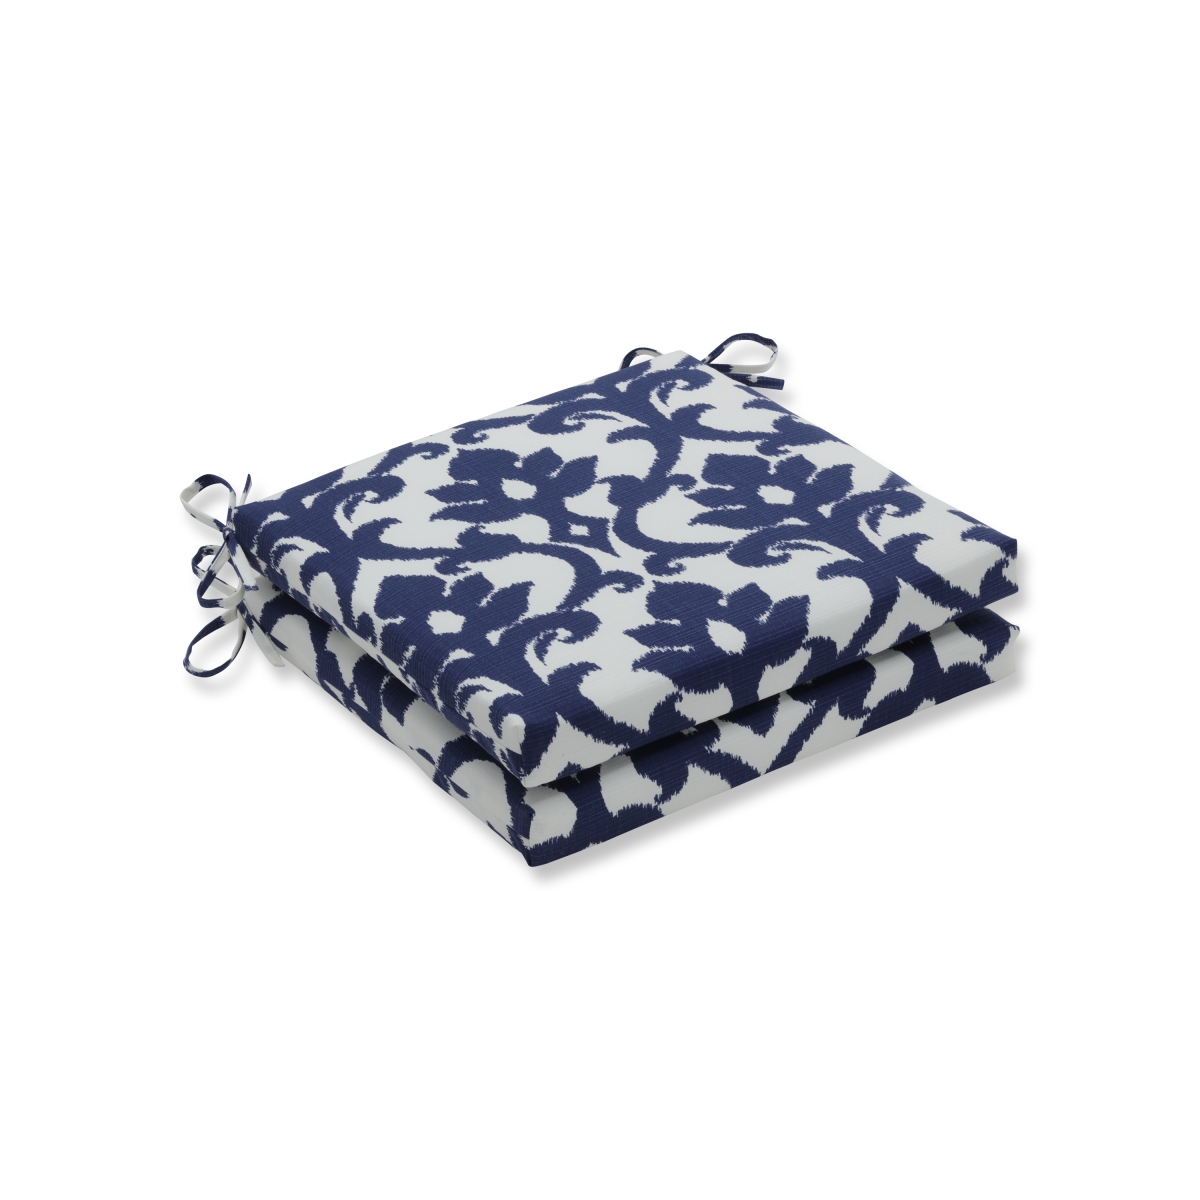 20 X 20 X 3 In. Outdoor & Indoor Basalto Navy Squared Corners Seat Cushion, Blue - Set Of 2